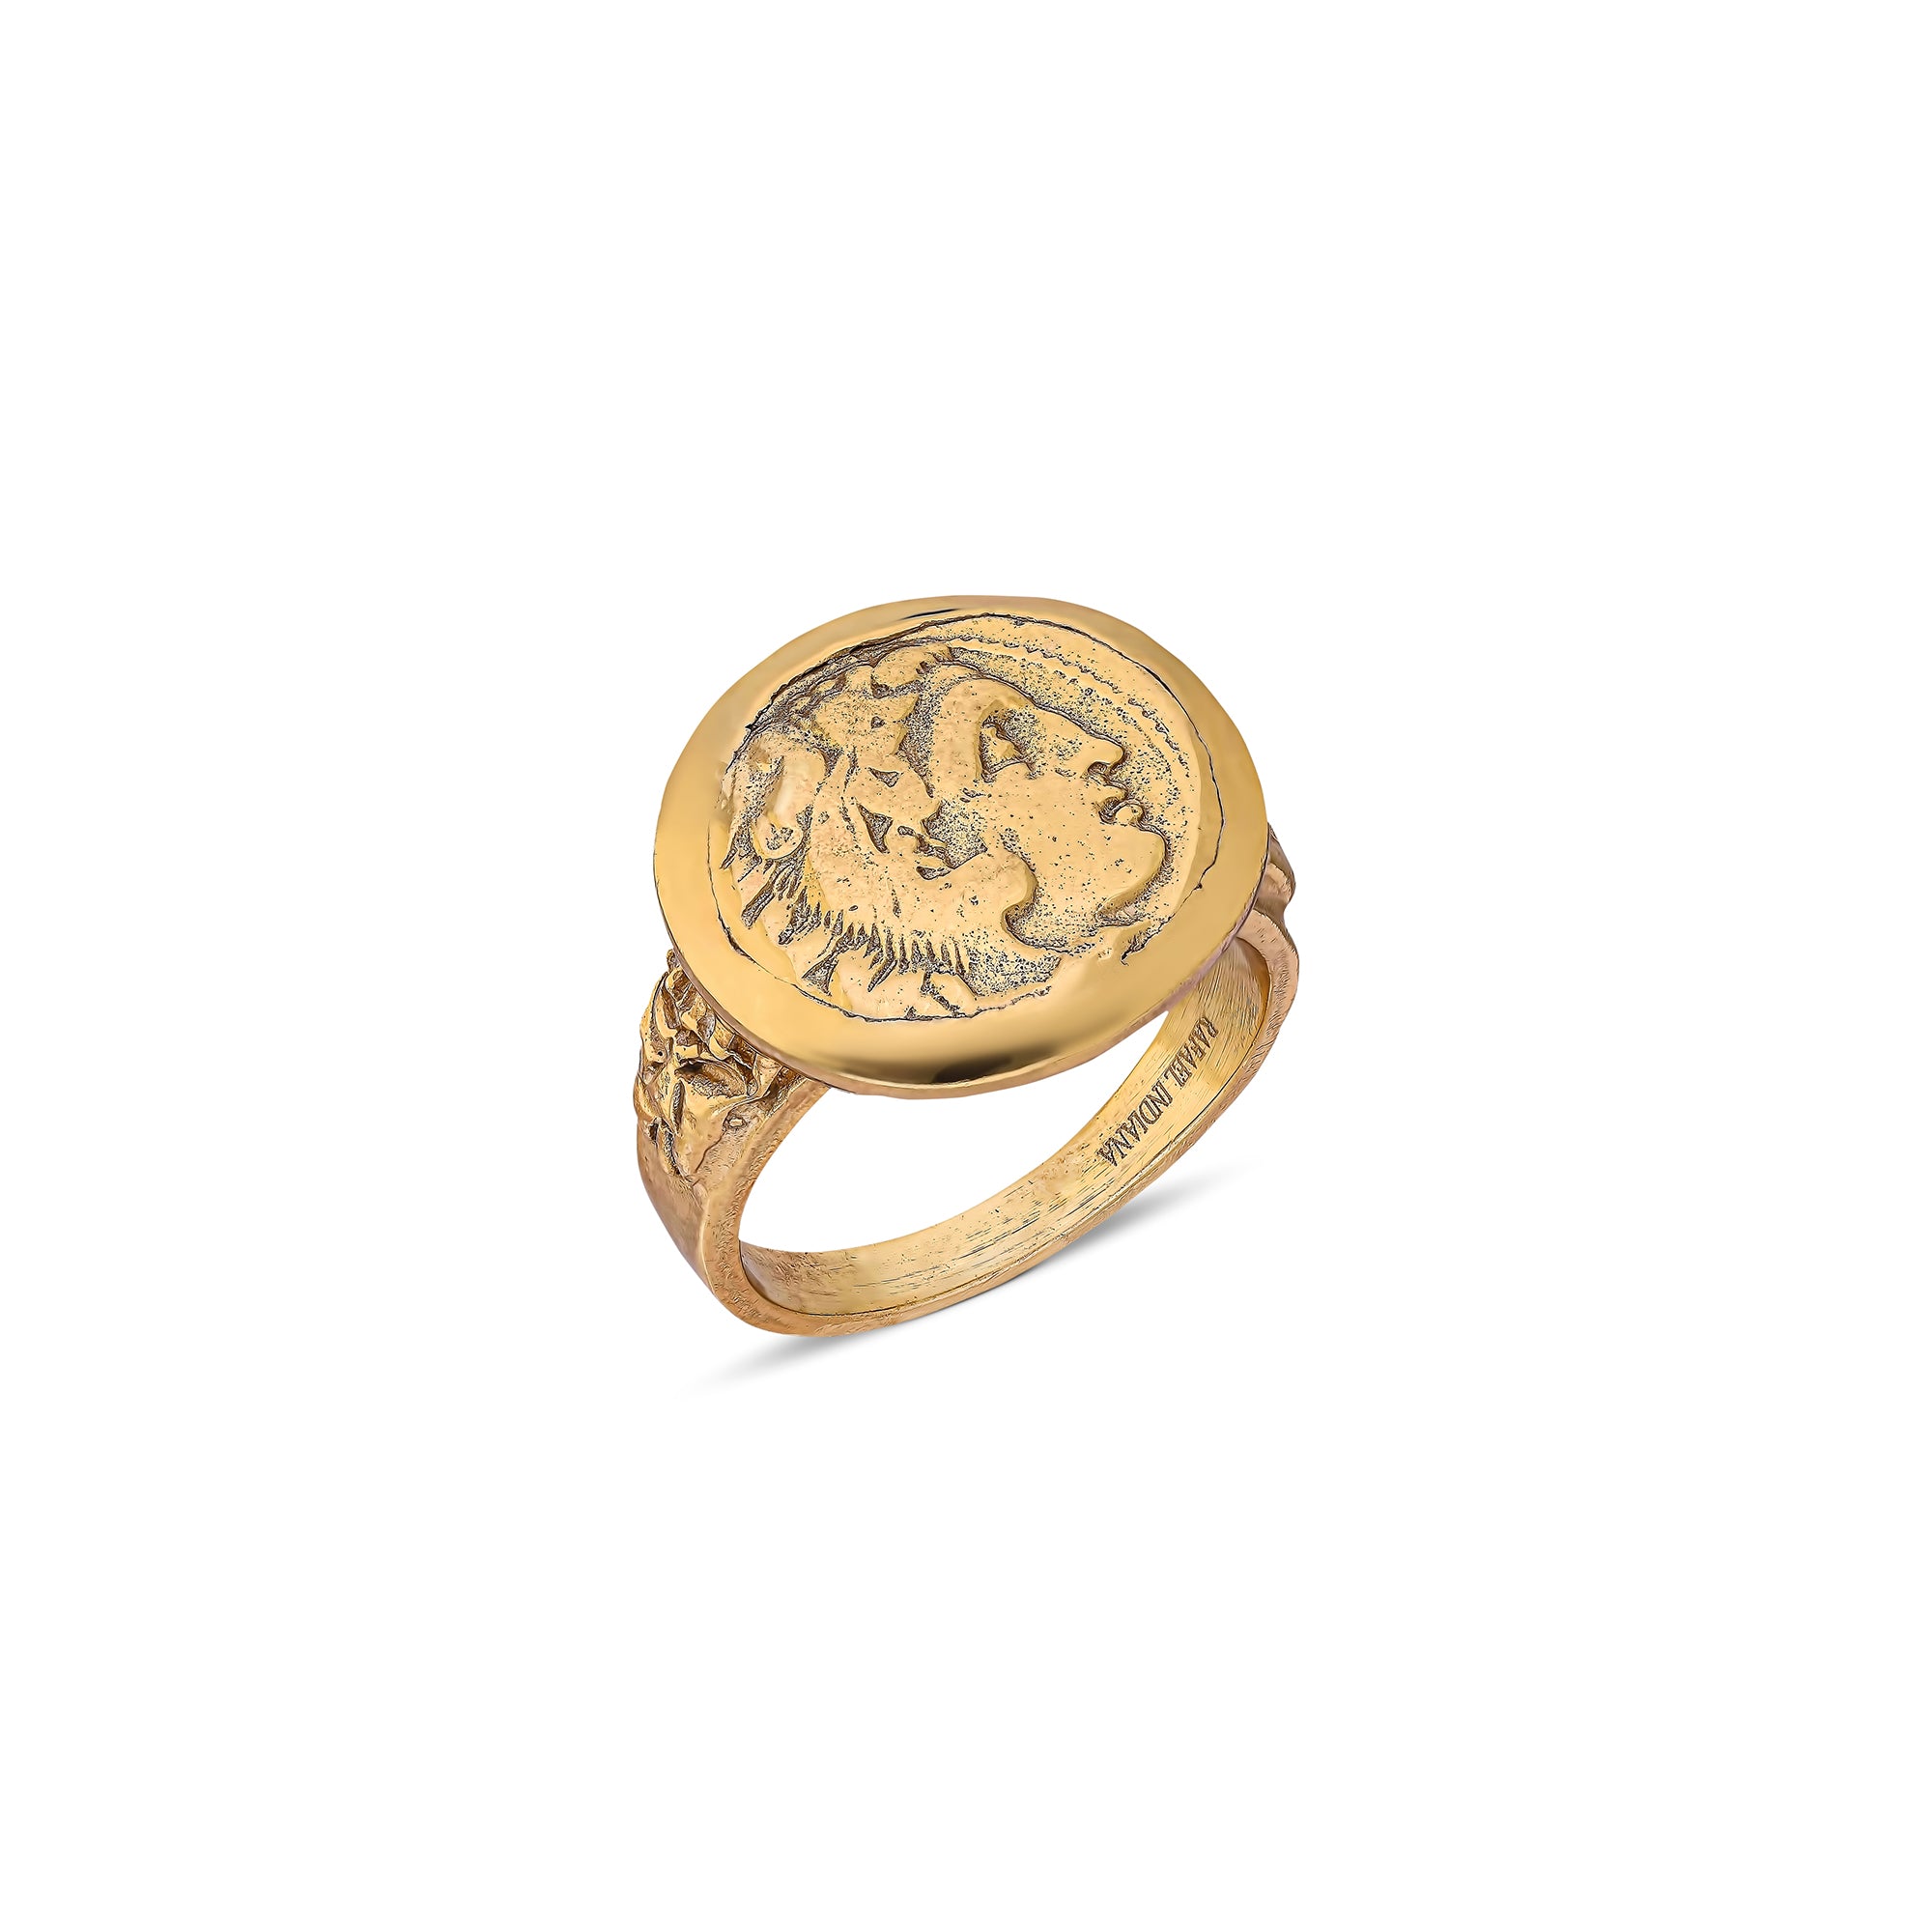 THE ALEXANDER RING